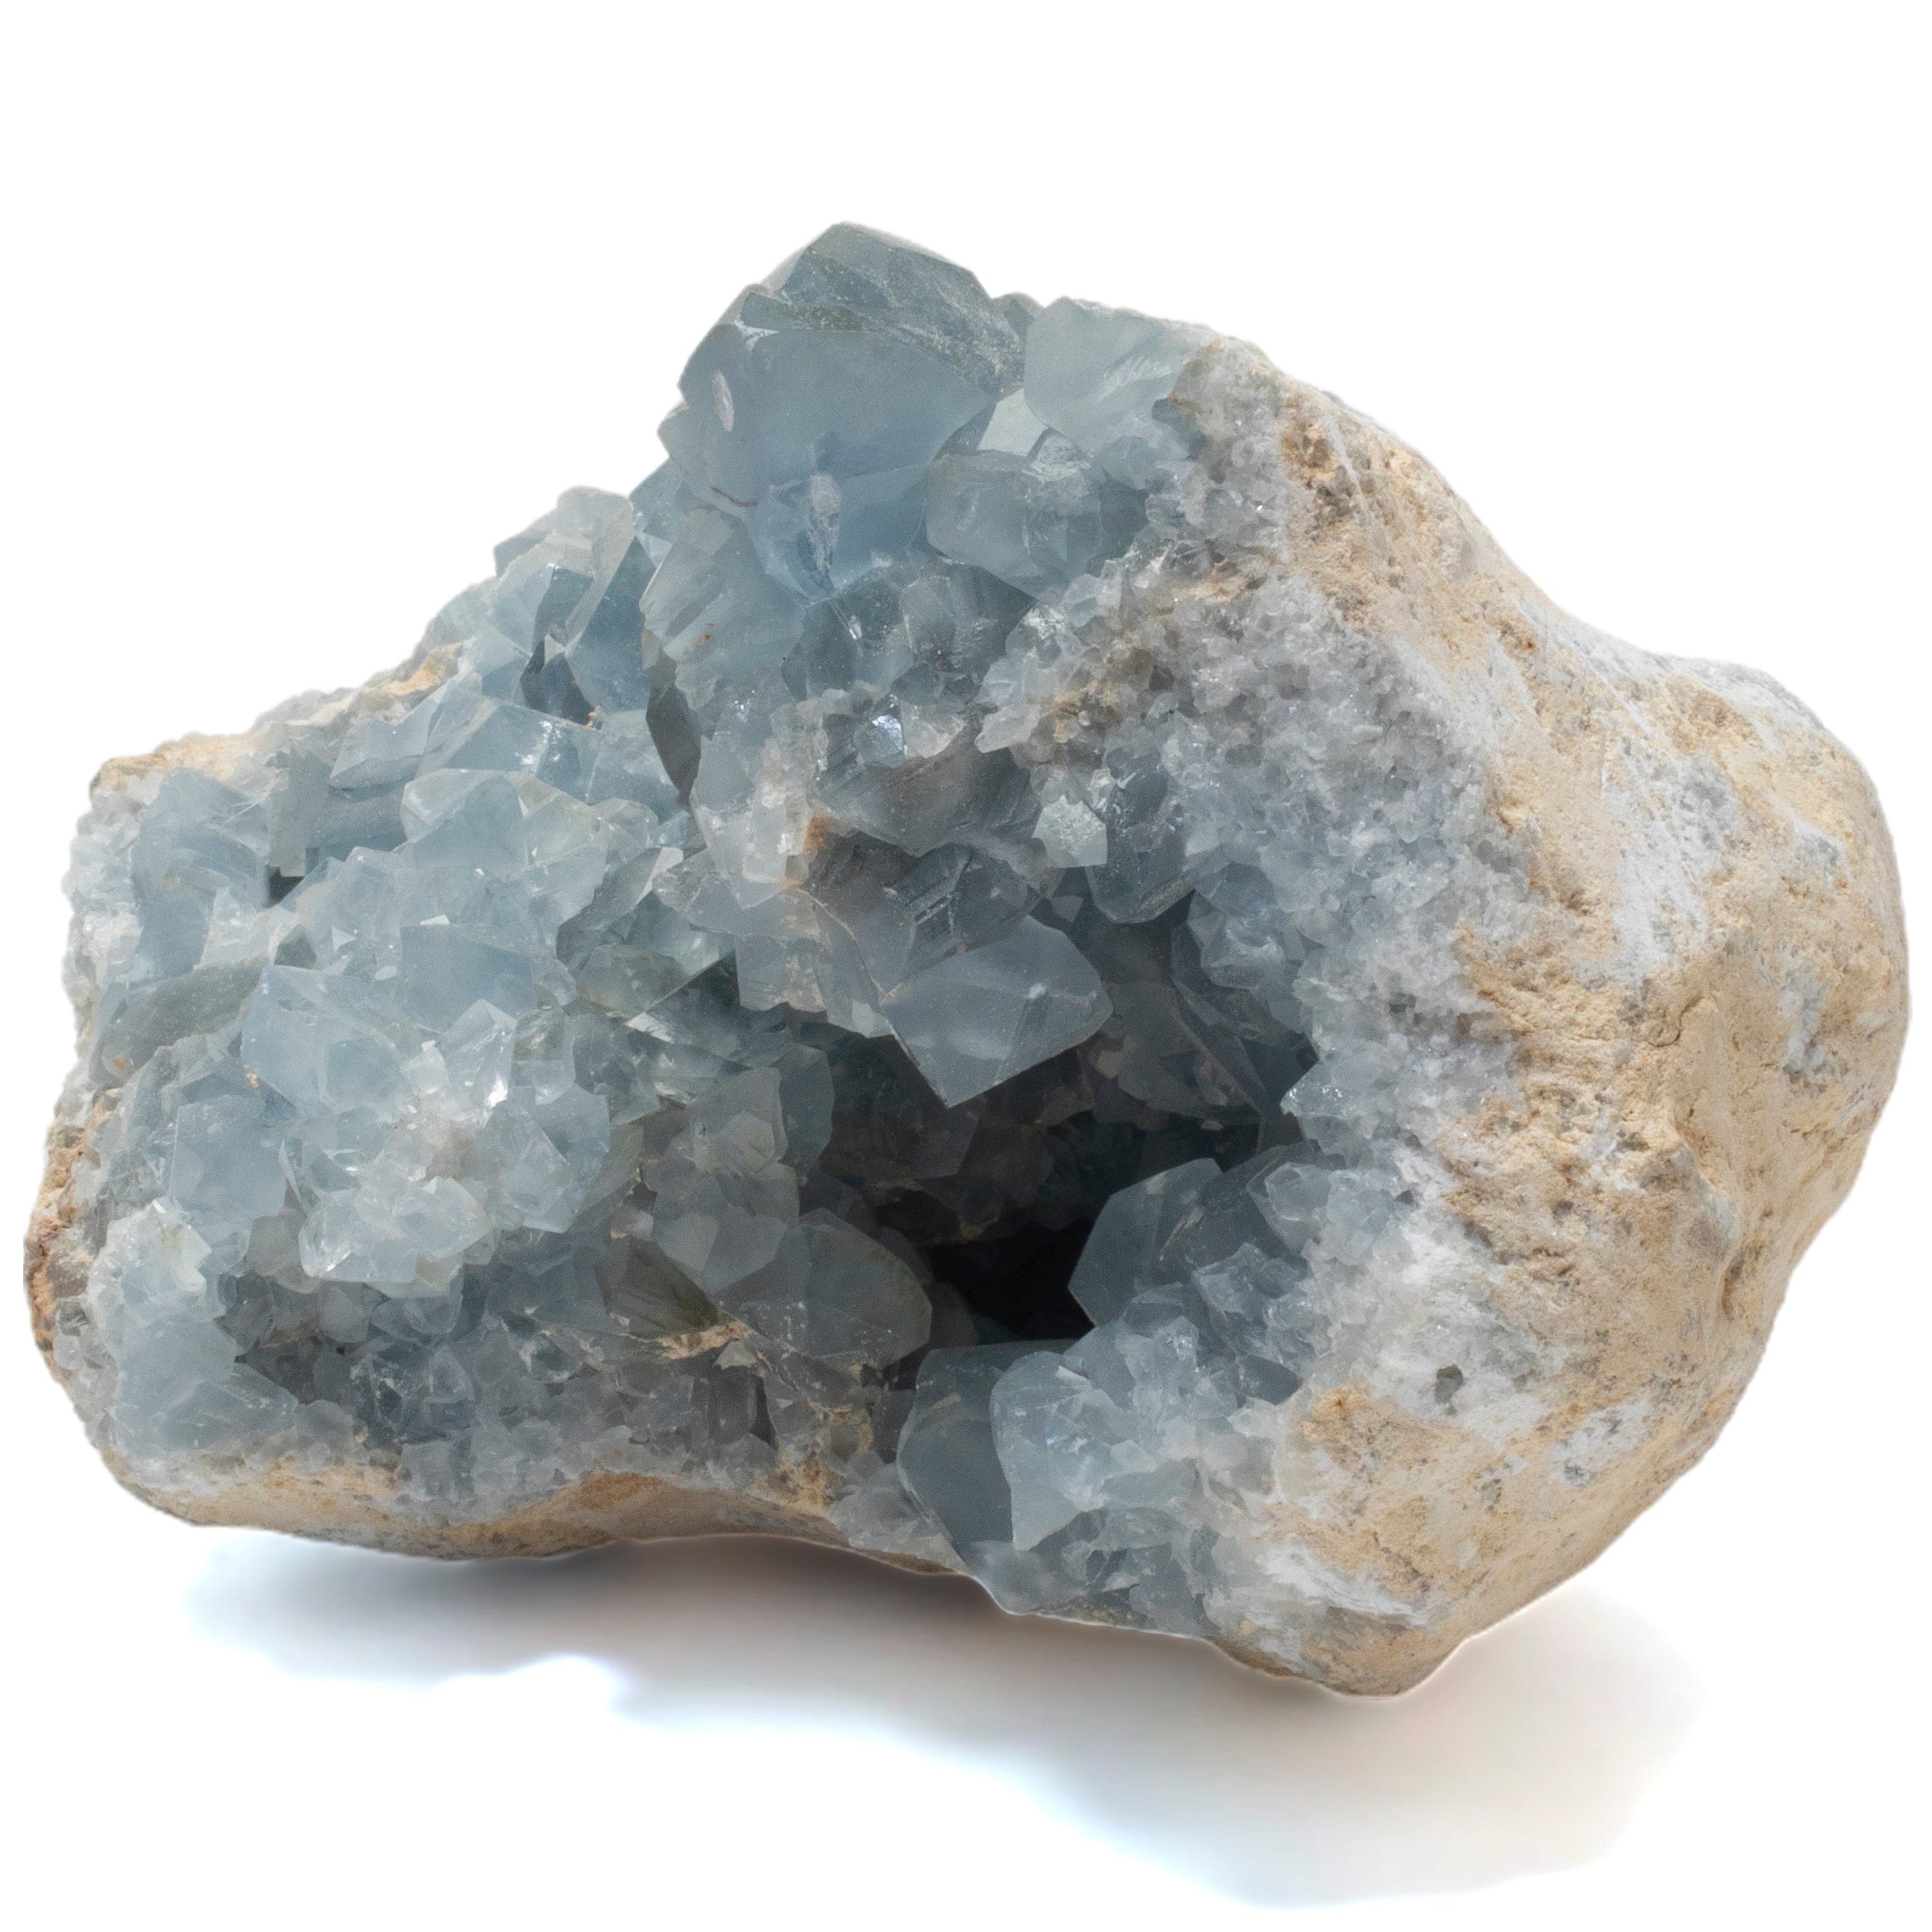 Kalifano Celestite Natural Celestite Crystal Cluster Geode from Madagascar - 8.5 in. CG1500.002